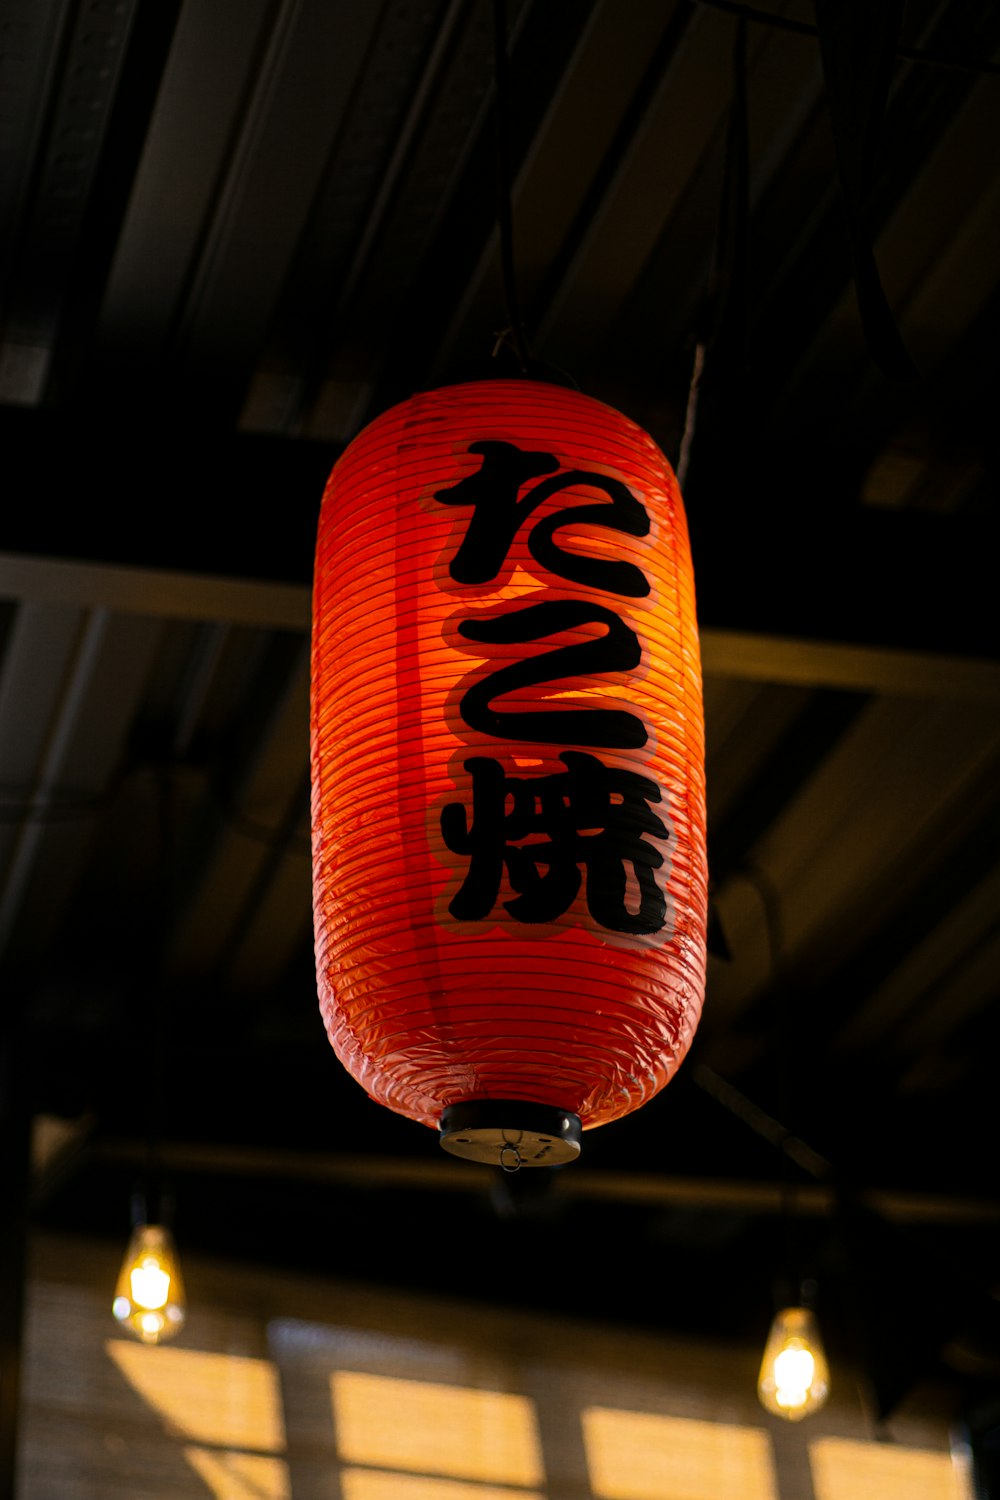 a red lantern hanging from the ceiling of a building